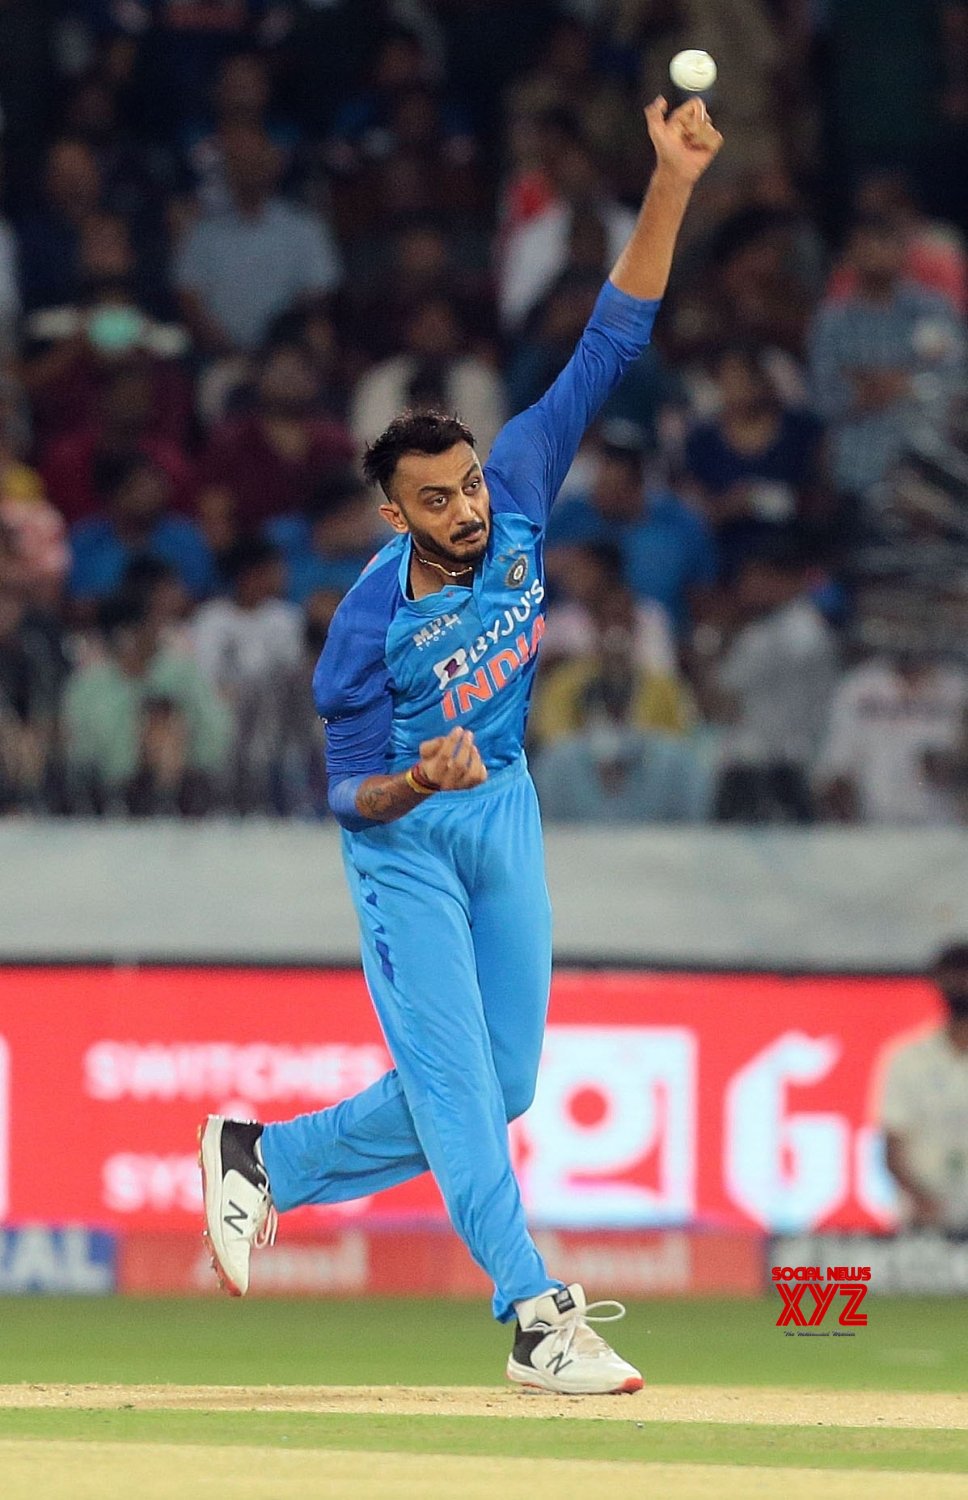 Hyderabad, Indian bowler Axar Patel in action #Gallery News XYZ